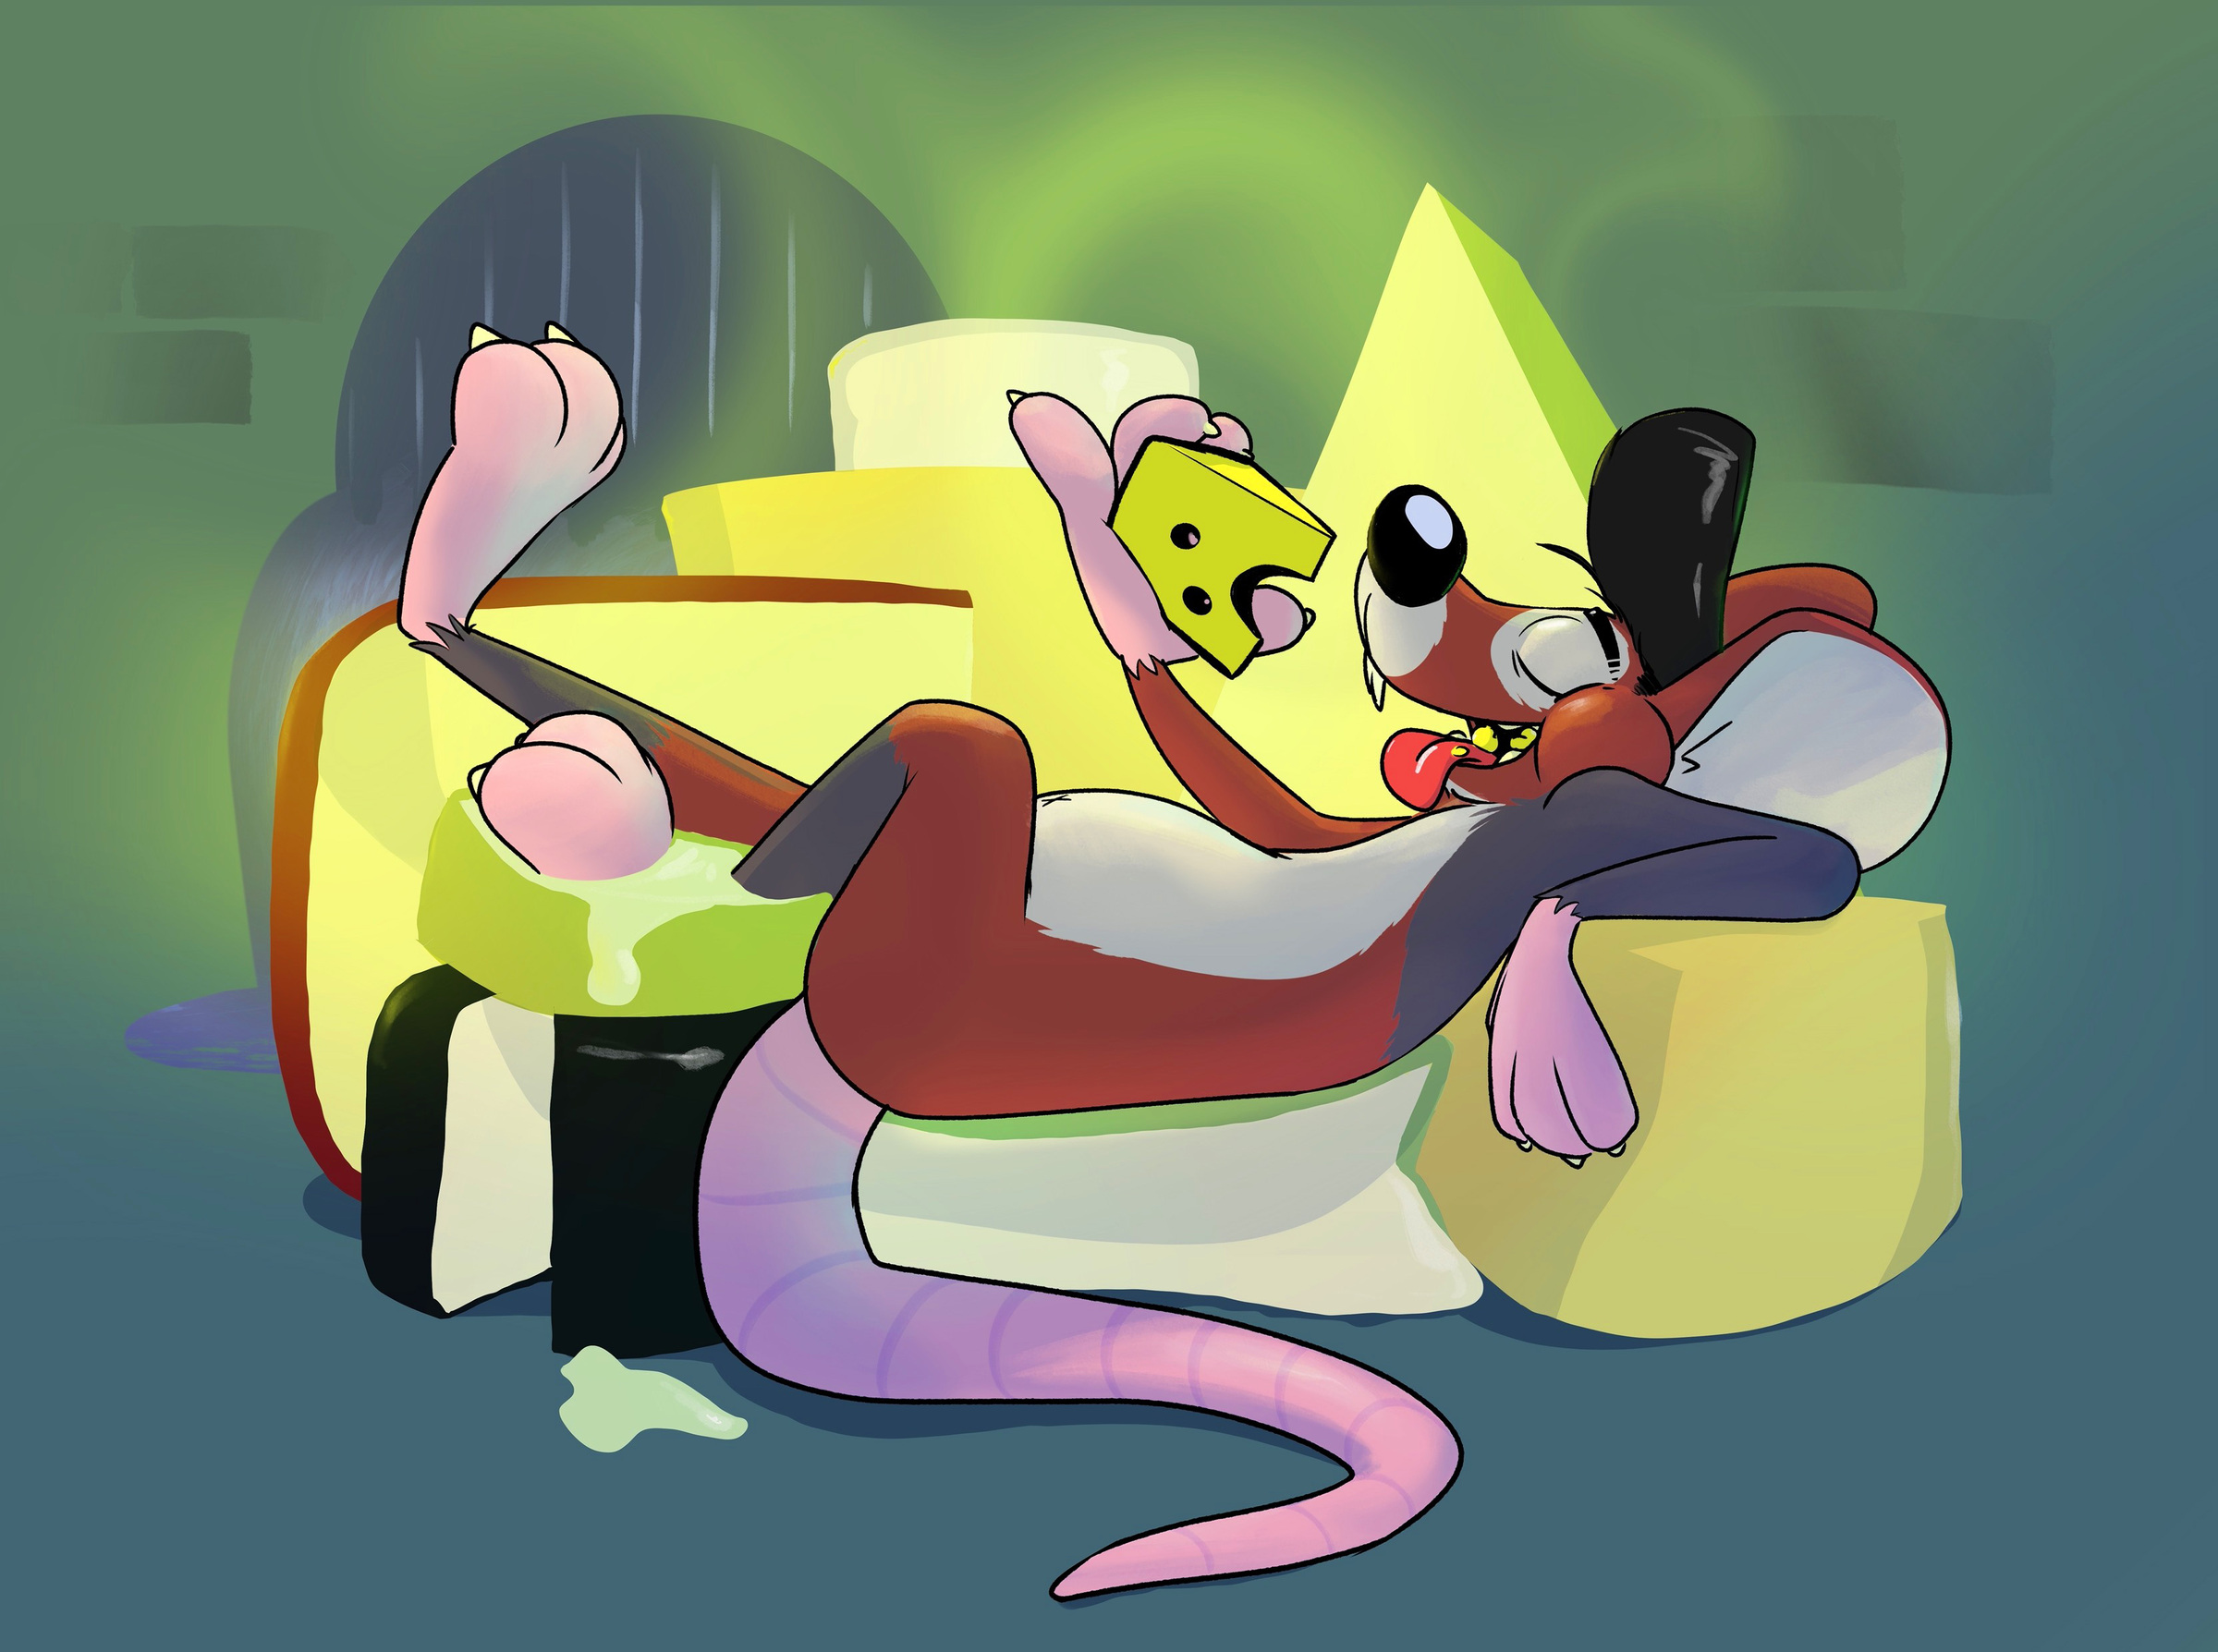 A cartoon rat sitting on a throne made of cheese, having a great time.